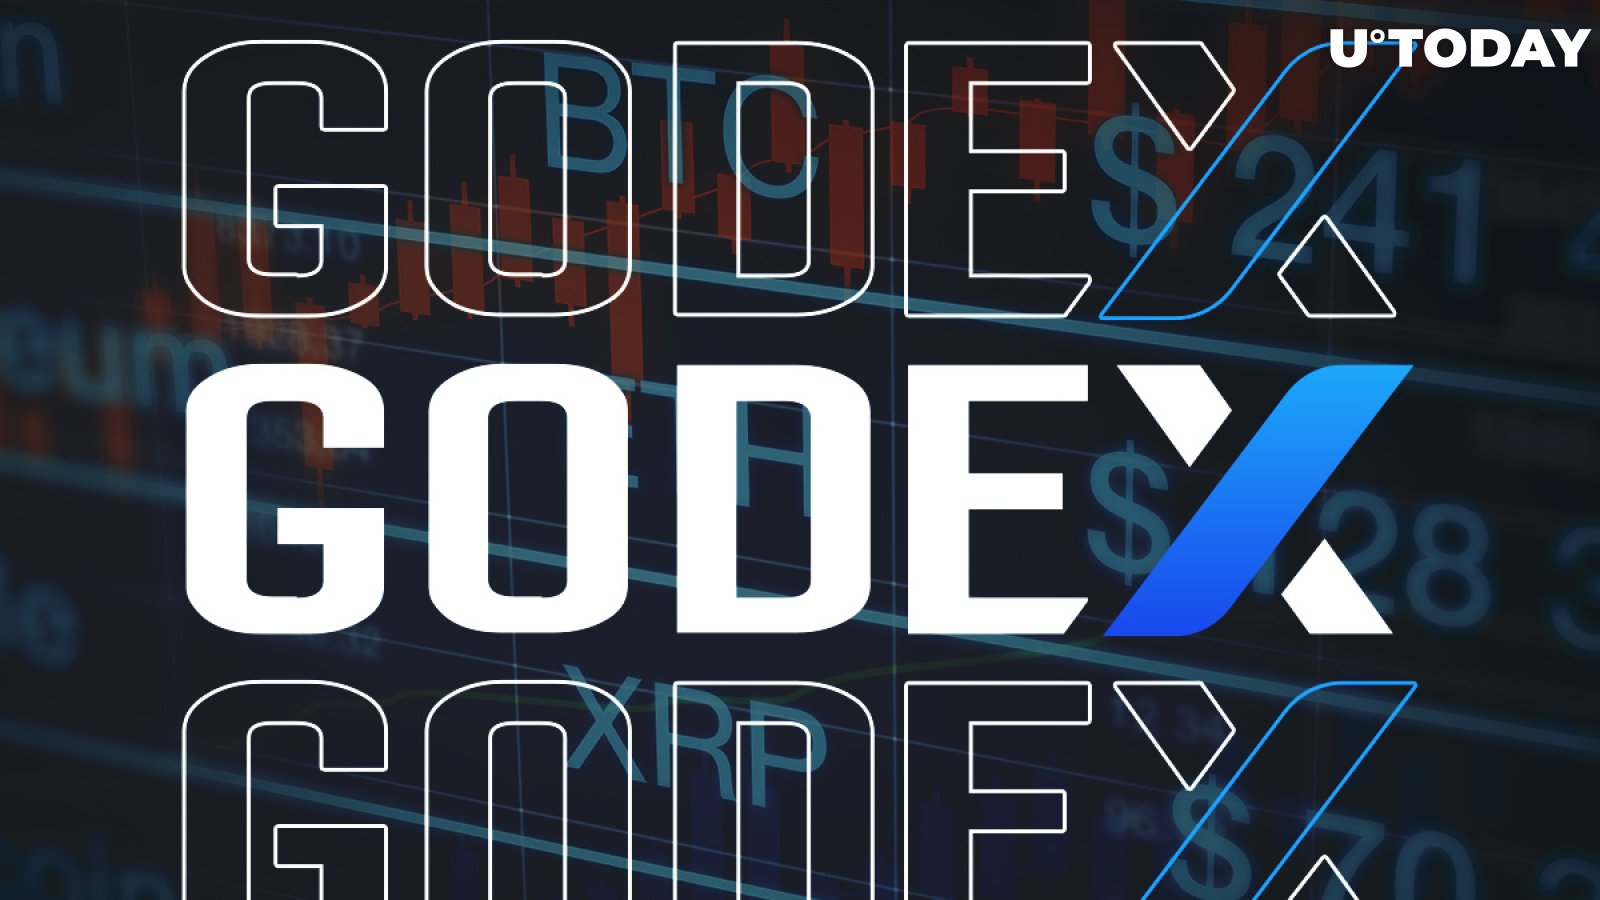 Godex Trading Platform Offers Instant Exchange of 200+ Coins With No KYC